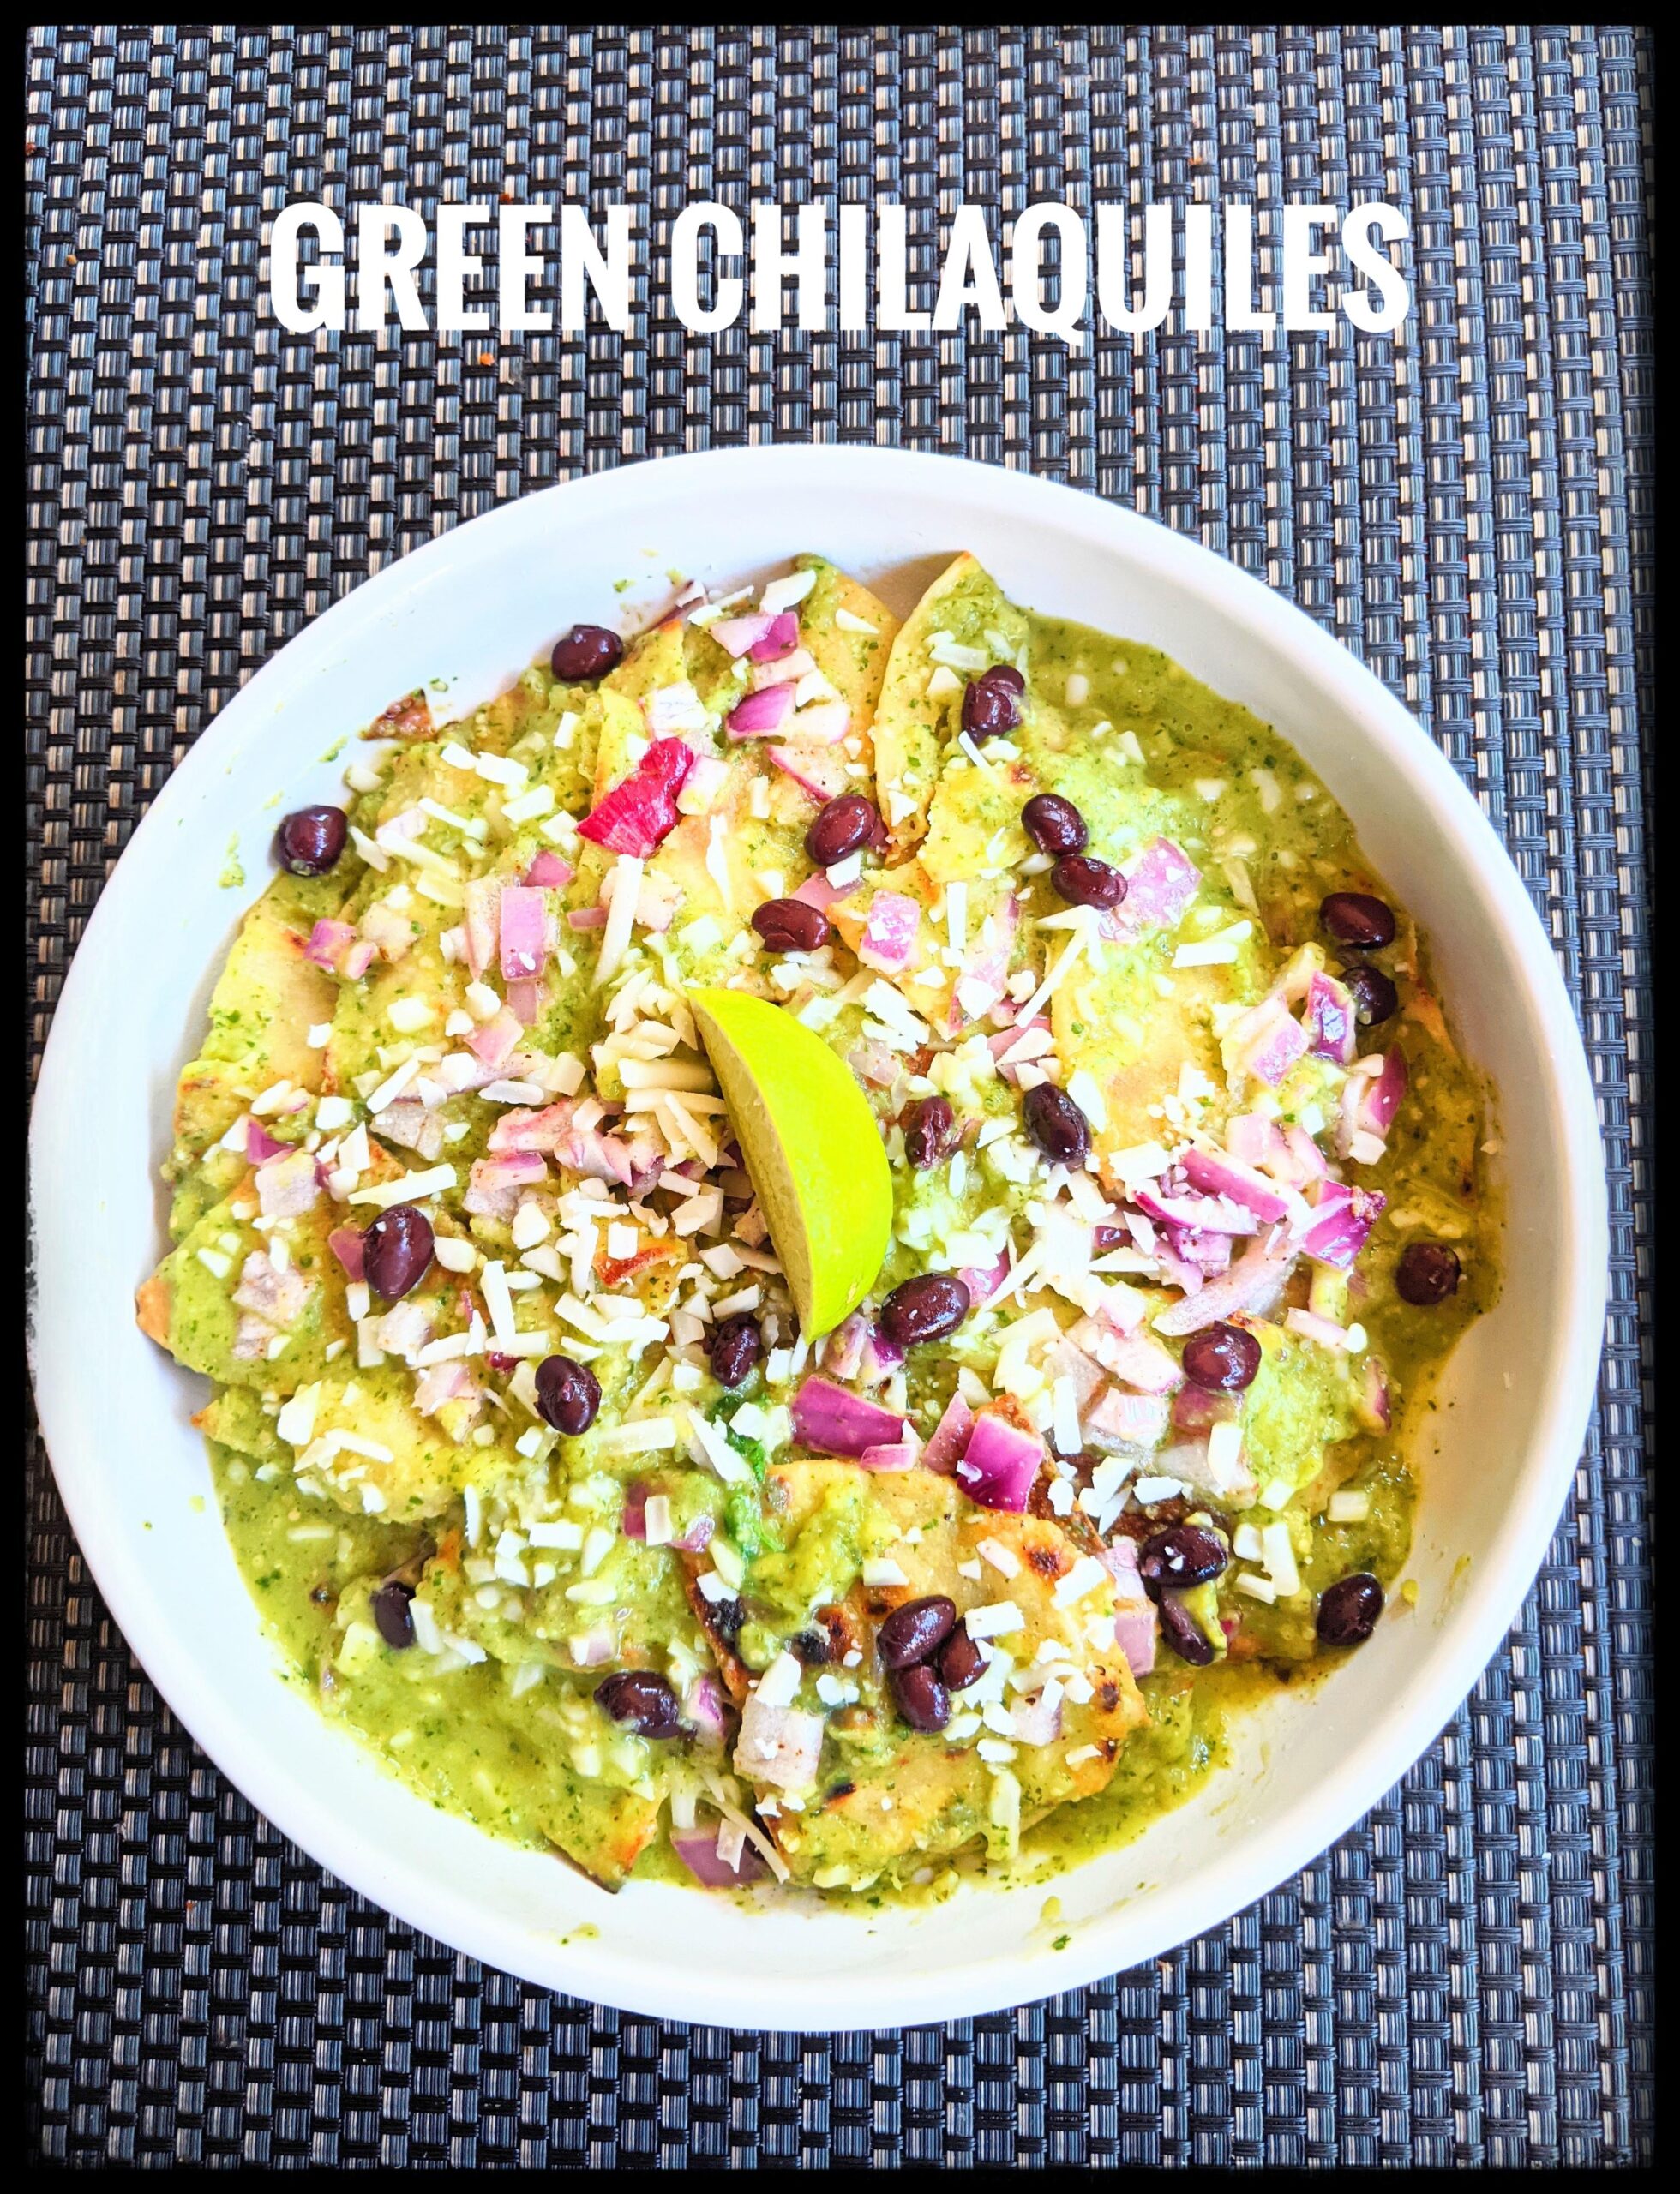 Green chilaquiles with vegan cotija cheese